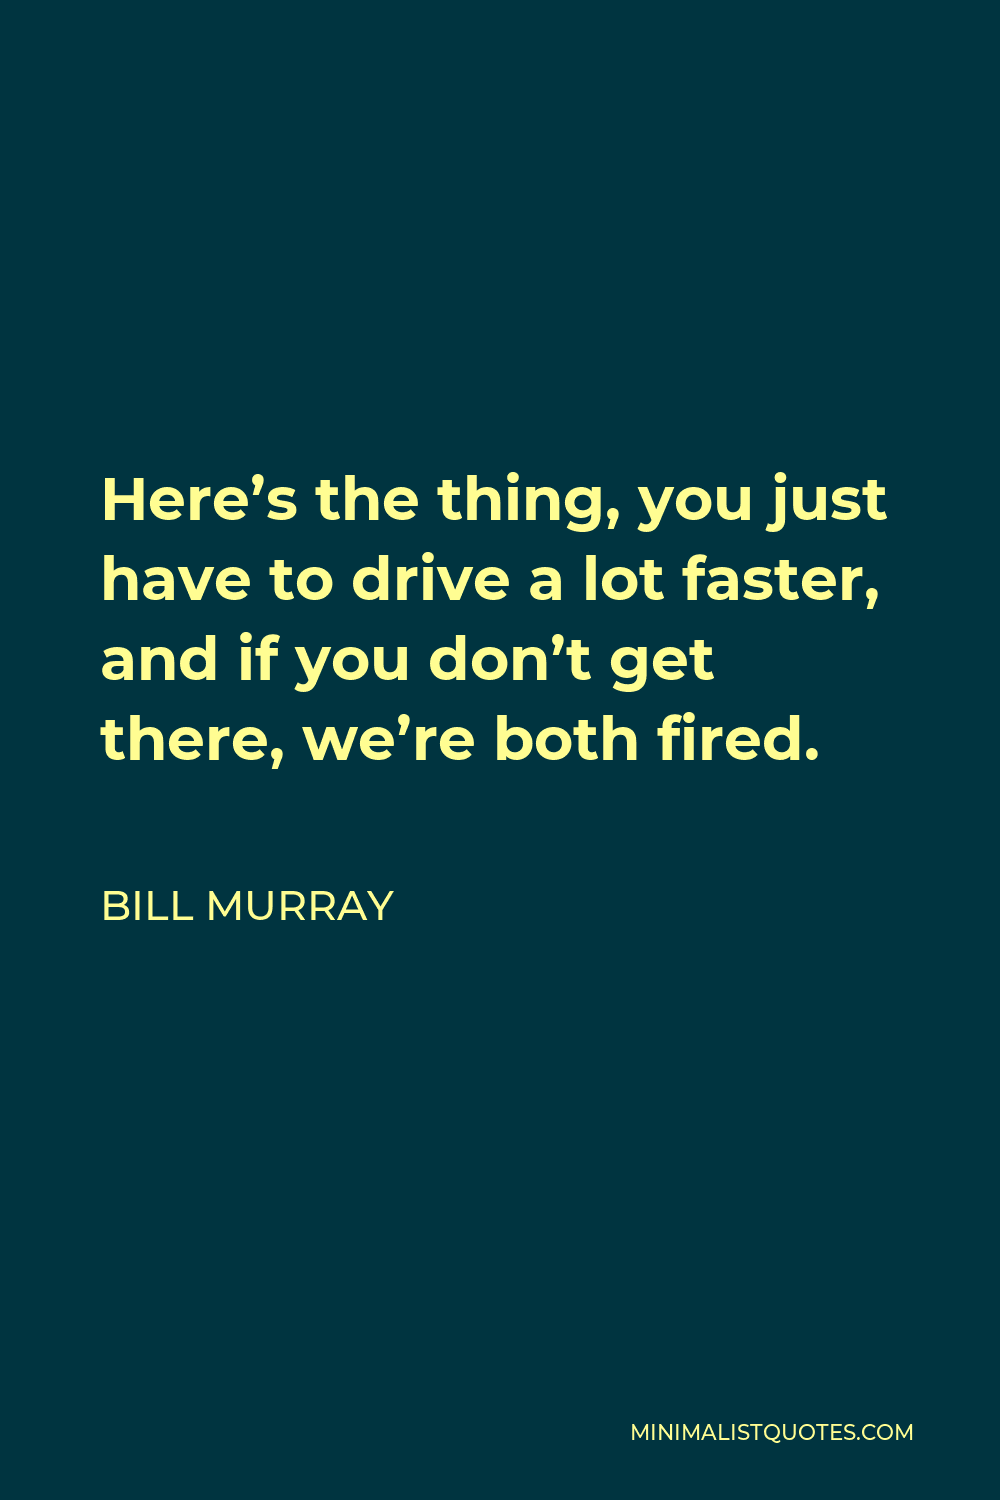 Bill Murray Quote - Here’s the thing, you just have to drive a lot faster, and if you don’t get there, we’re both fired.